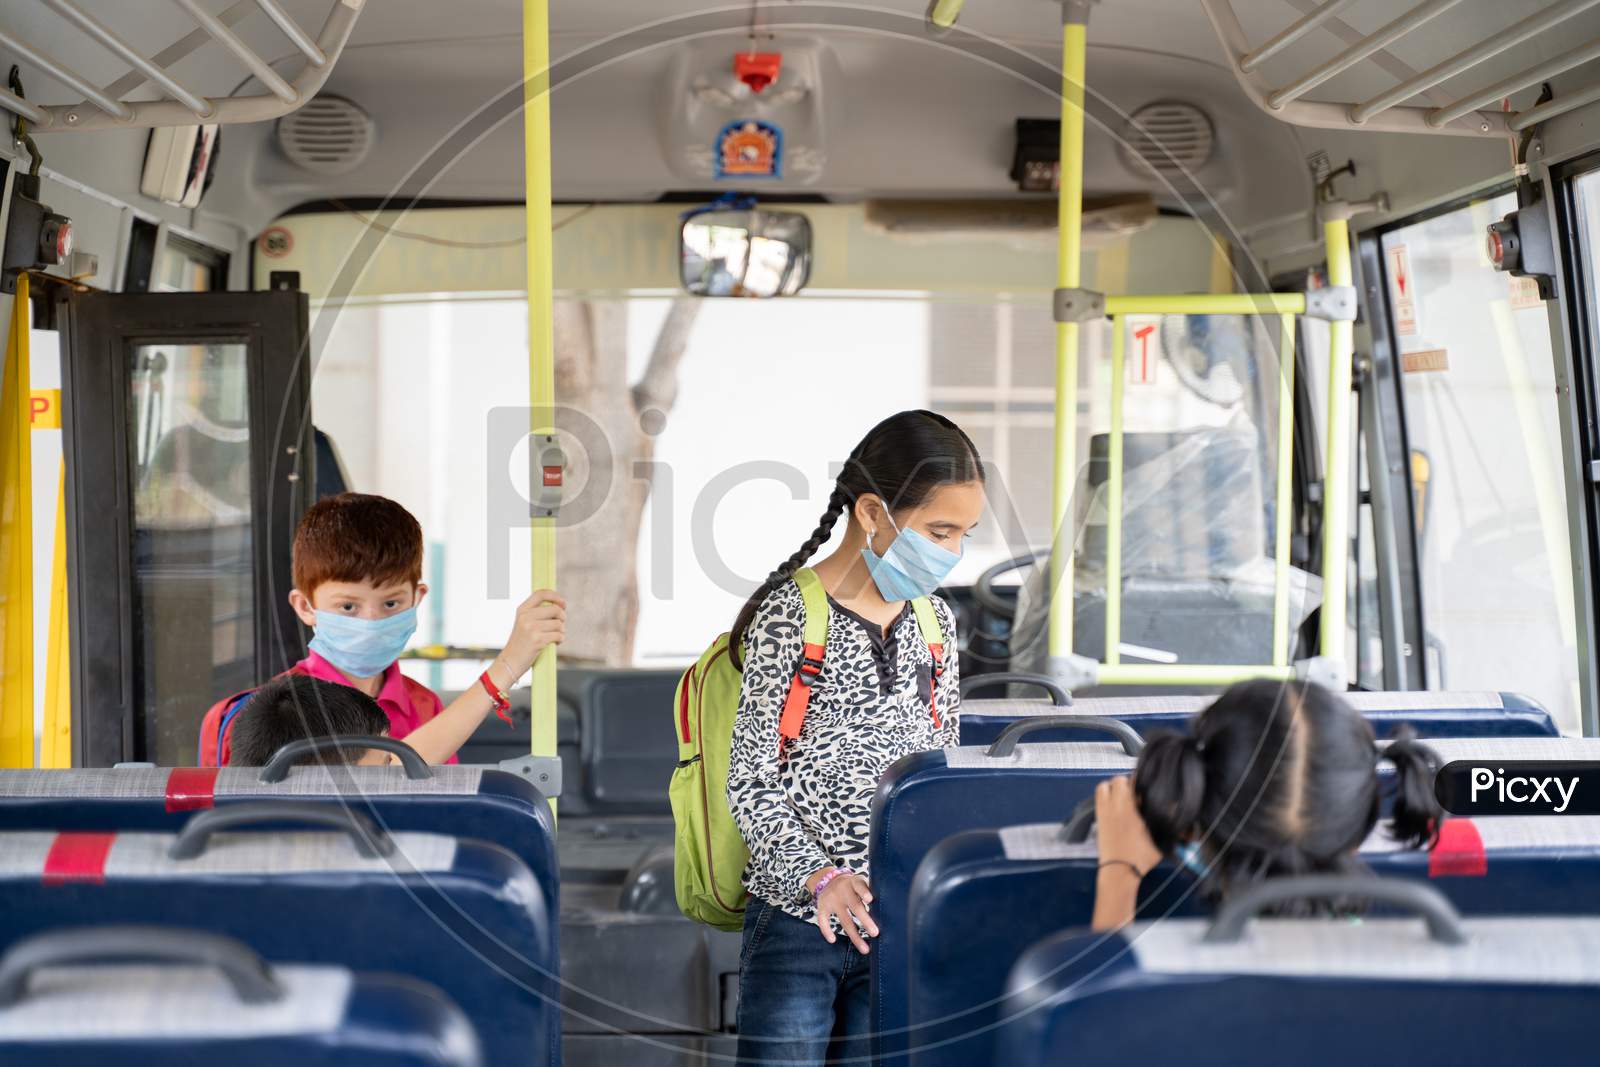 Kids With Medical Mask Coming Inside School Bus And Sitting On Seats While Maintaining Social Distance Due To Coronavirus Or Covid-19 Pandemic - Concept Of School Reopen Or Back To School